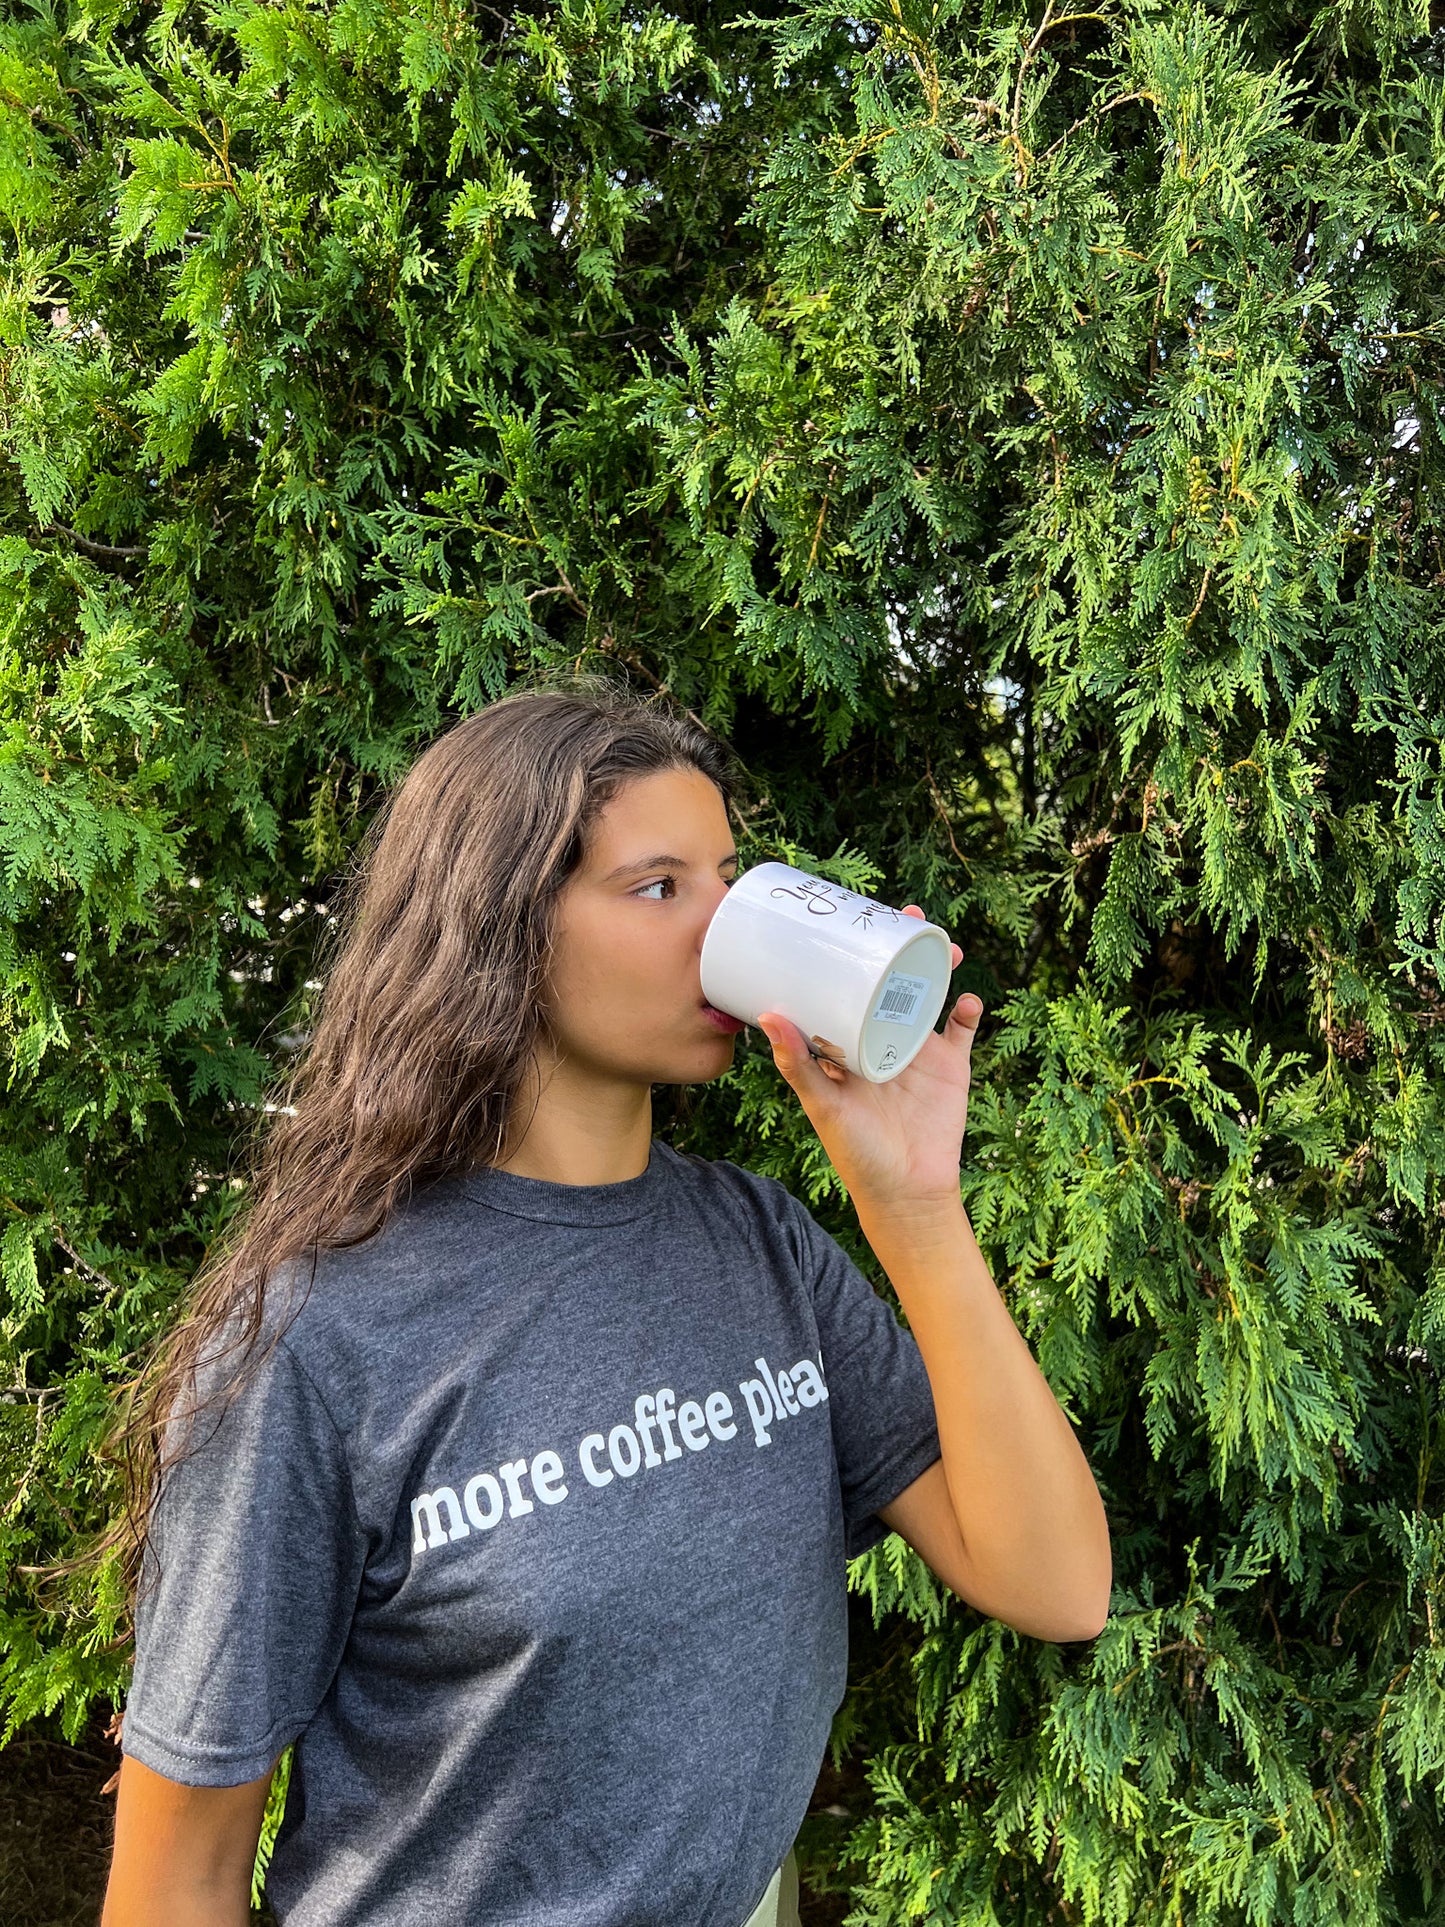 More Coffee Please T-Shirt